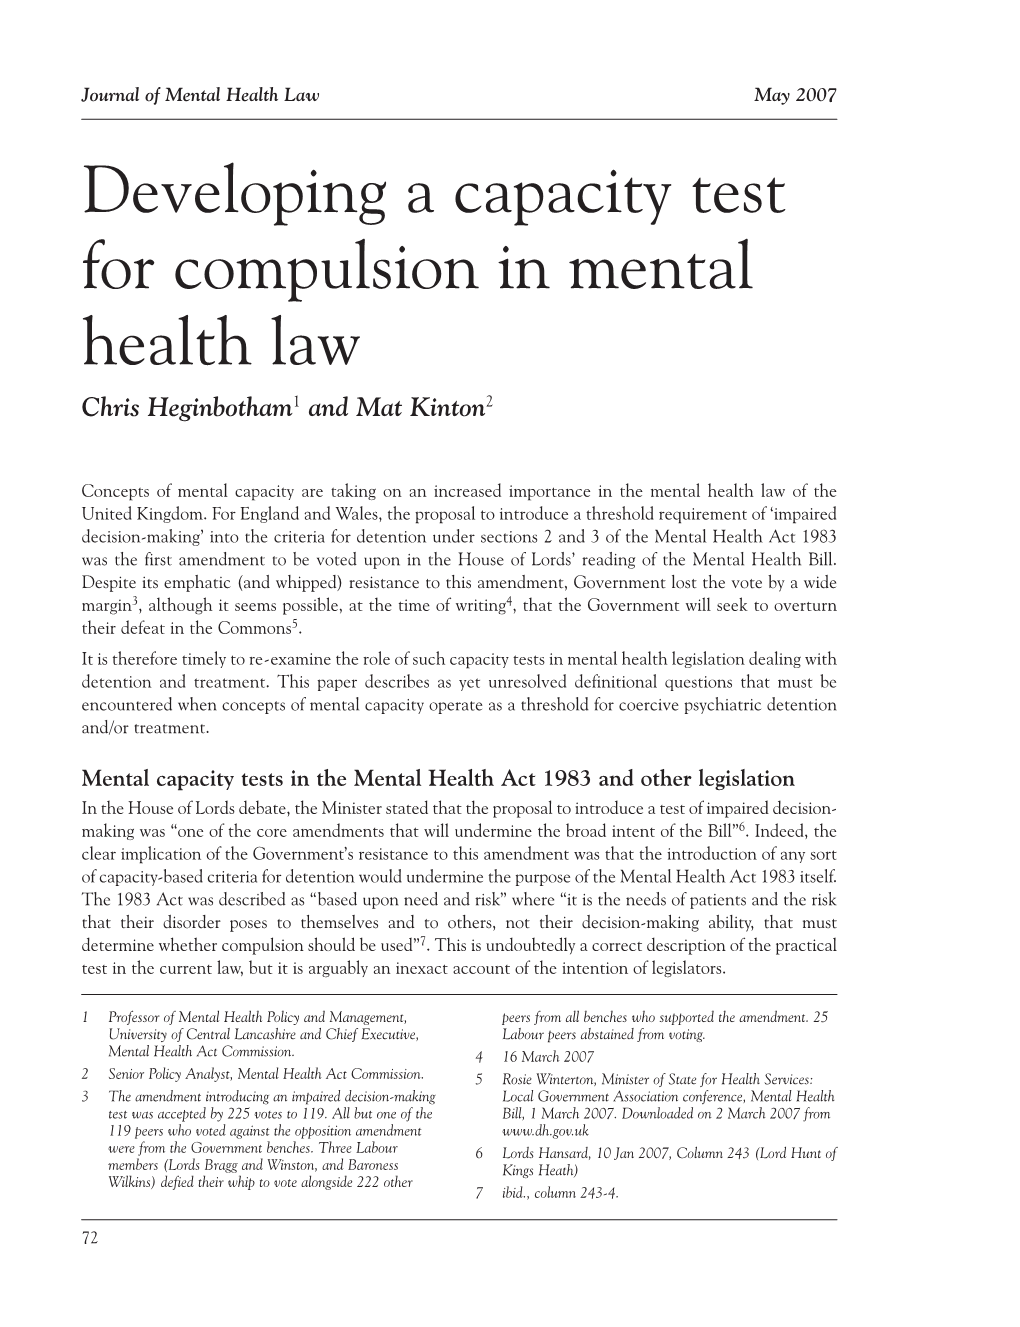 Developing a Capacity Test for Compulsion in Mental Health Law Chris Heginbotham1 and Mat Kinton2